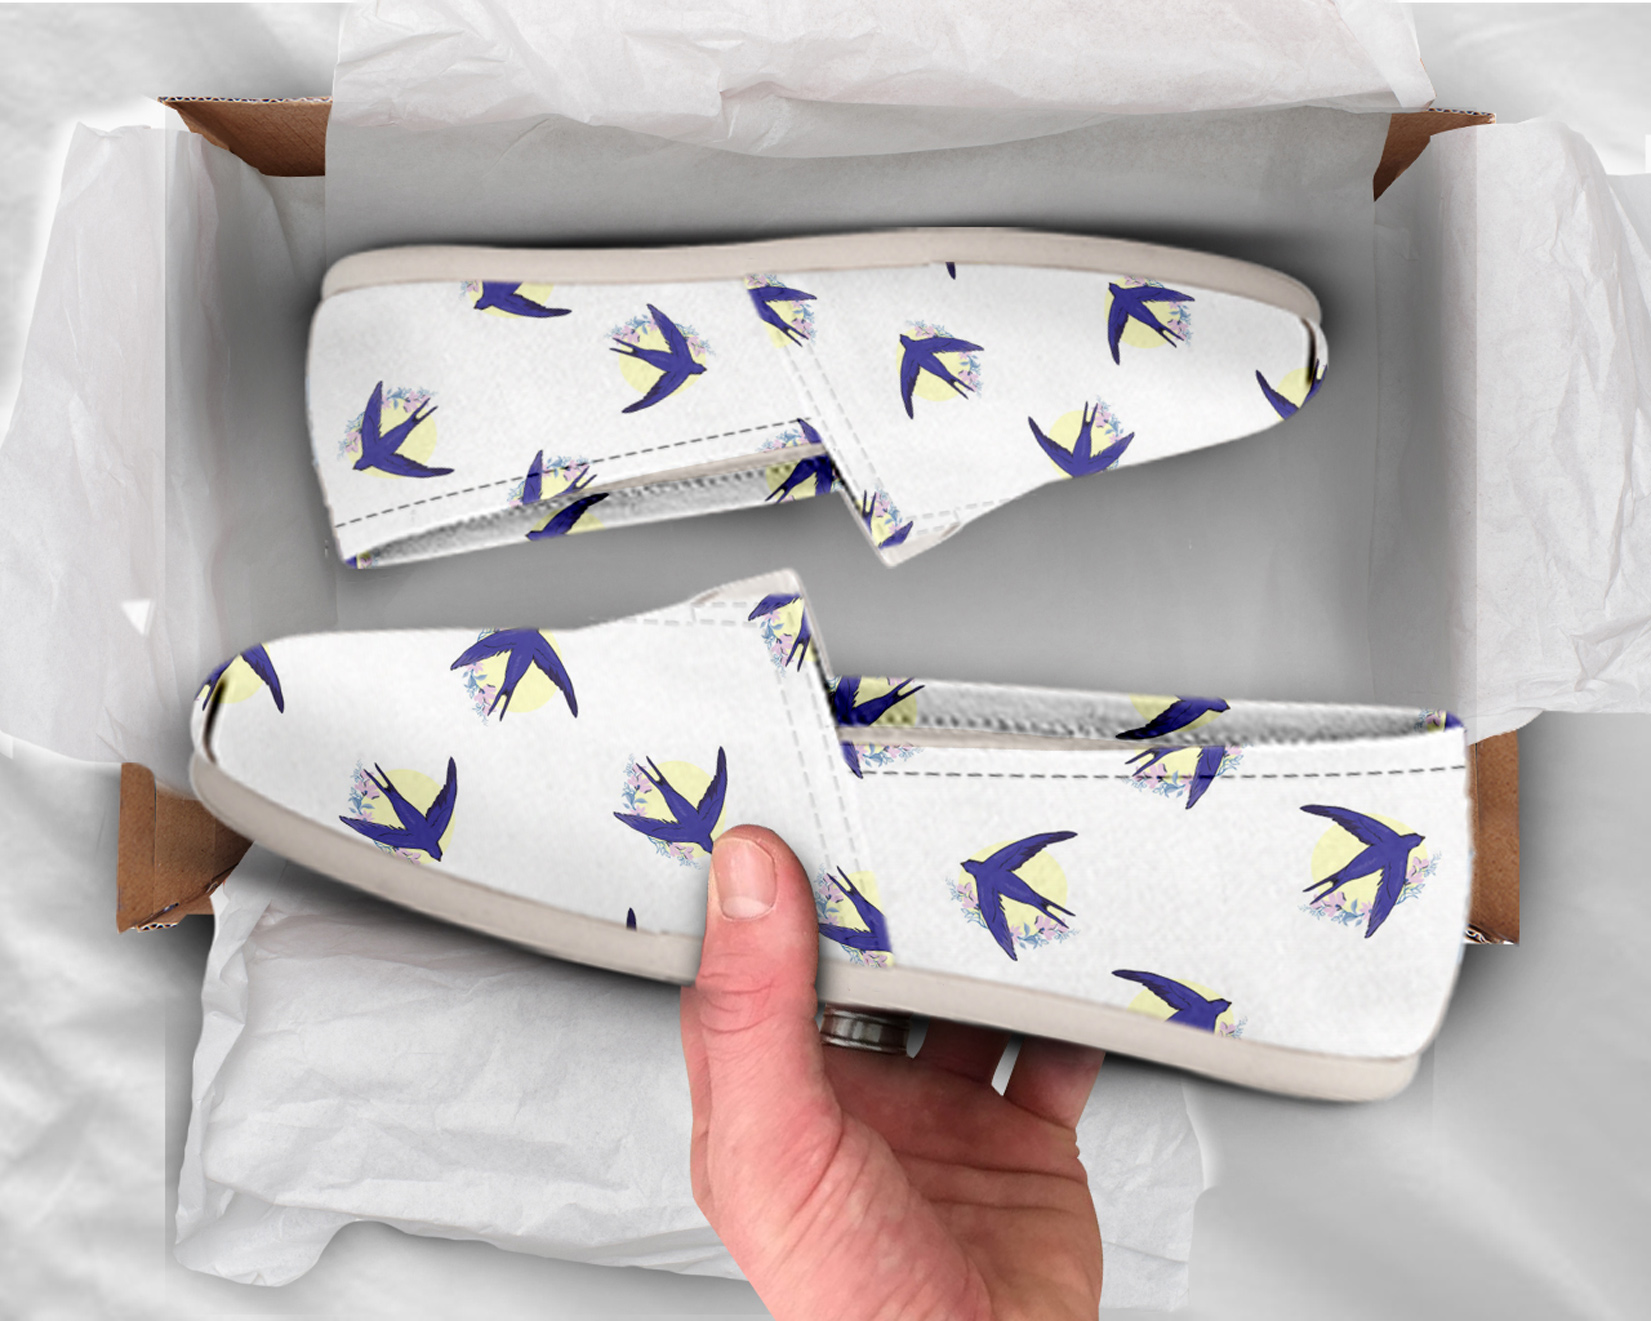 Swallow Designer Shoes | Custom Canvas Sneakers For Kids & Adults